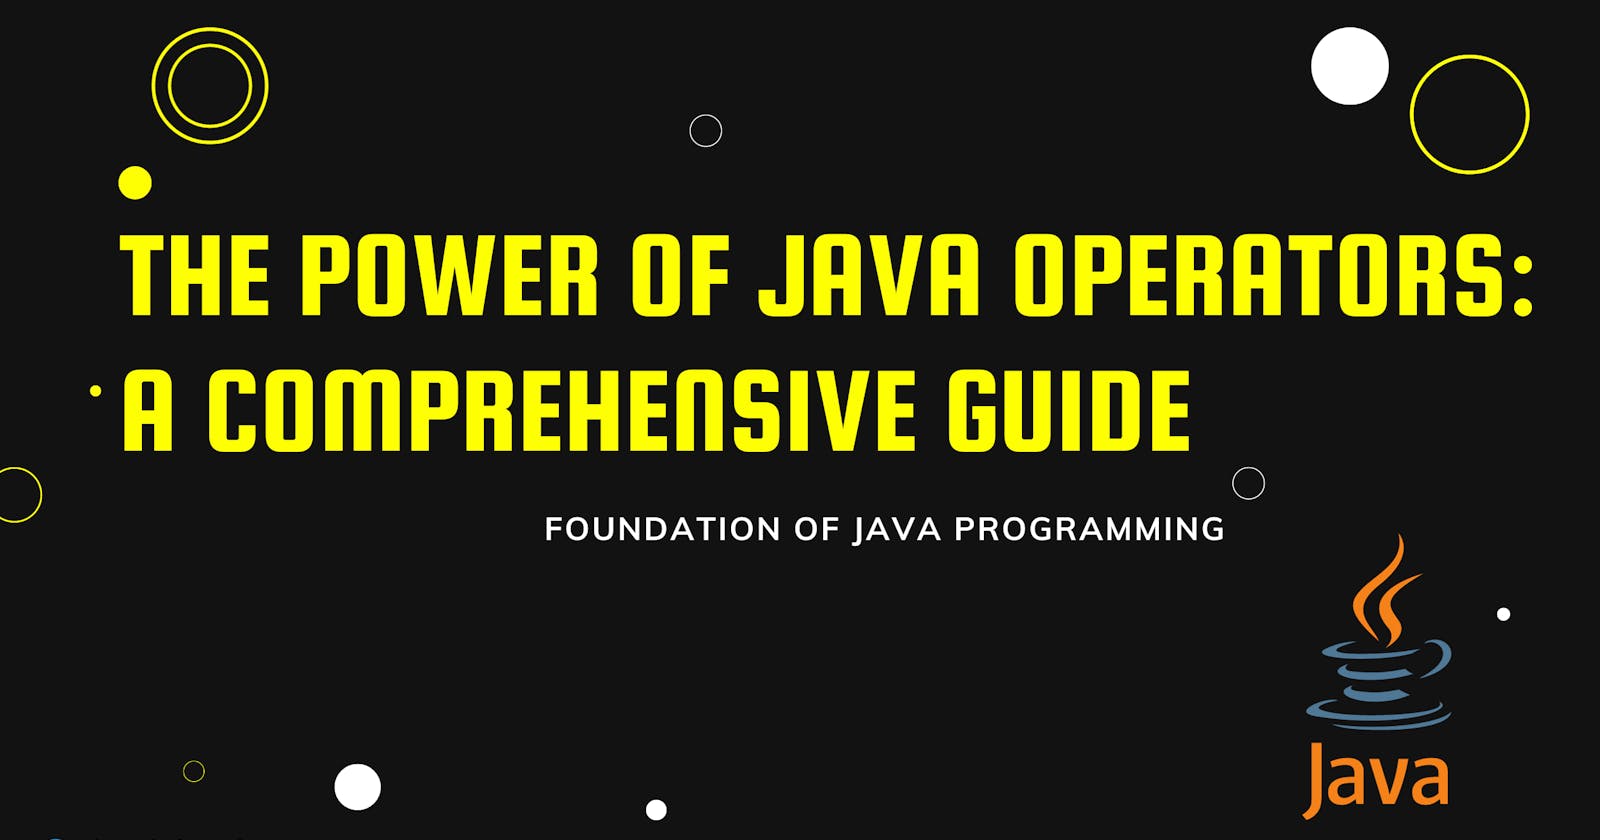 The Power of Java Operators: A Comprehensive Guide